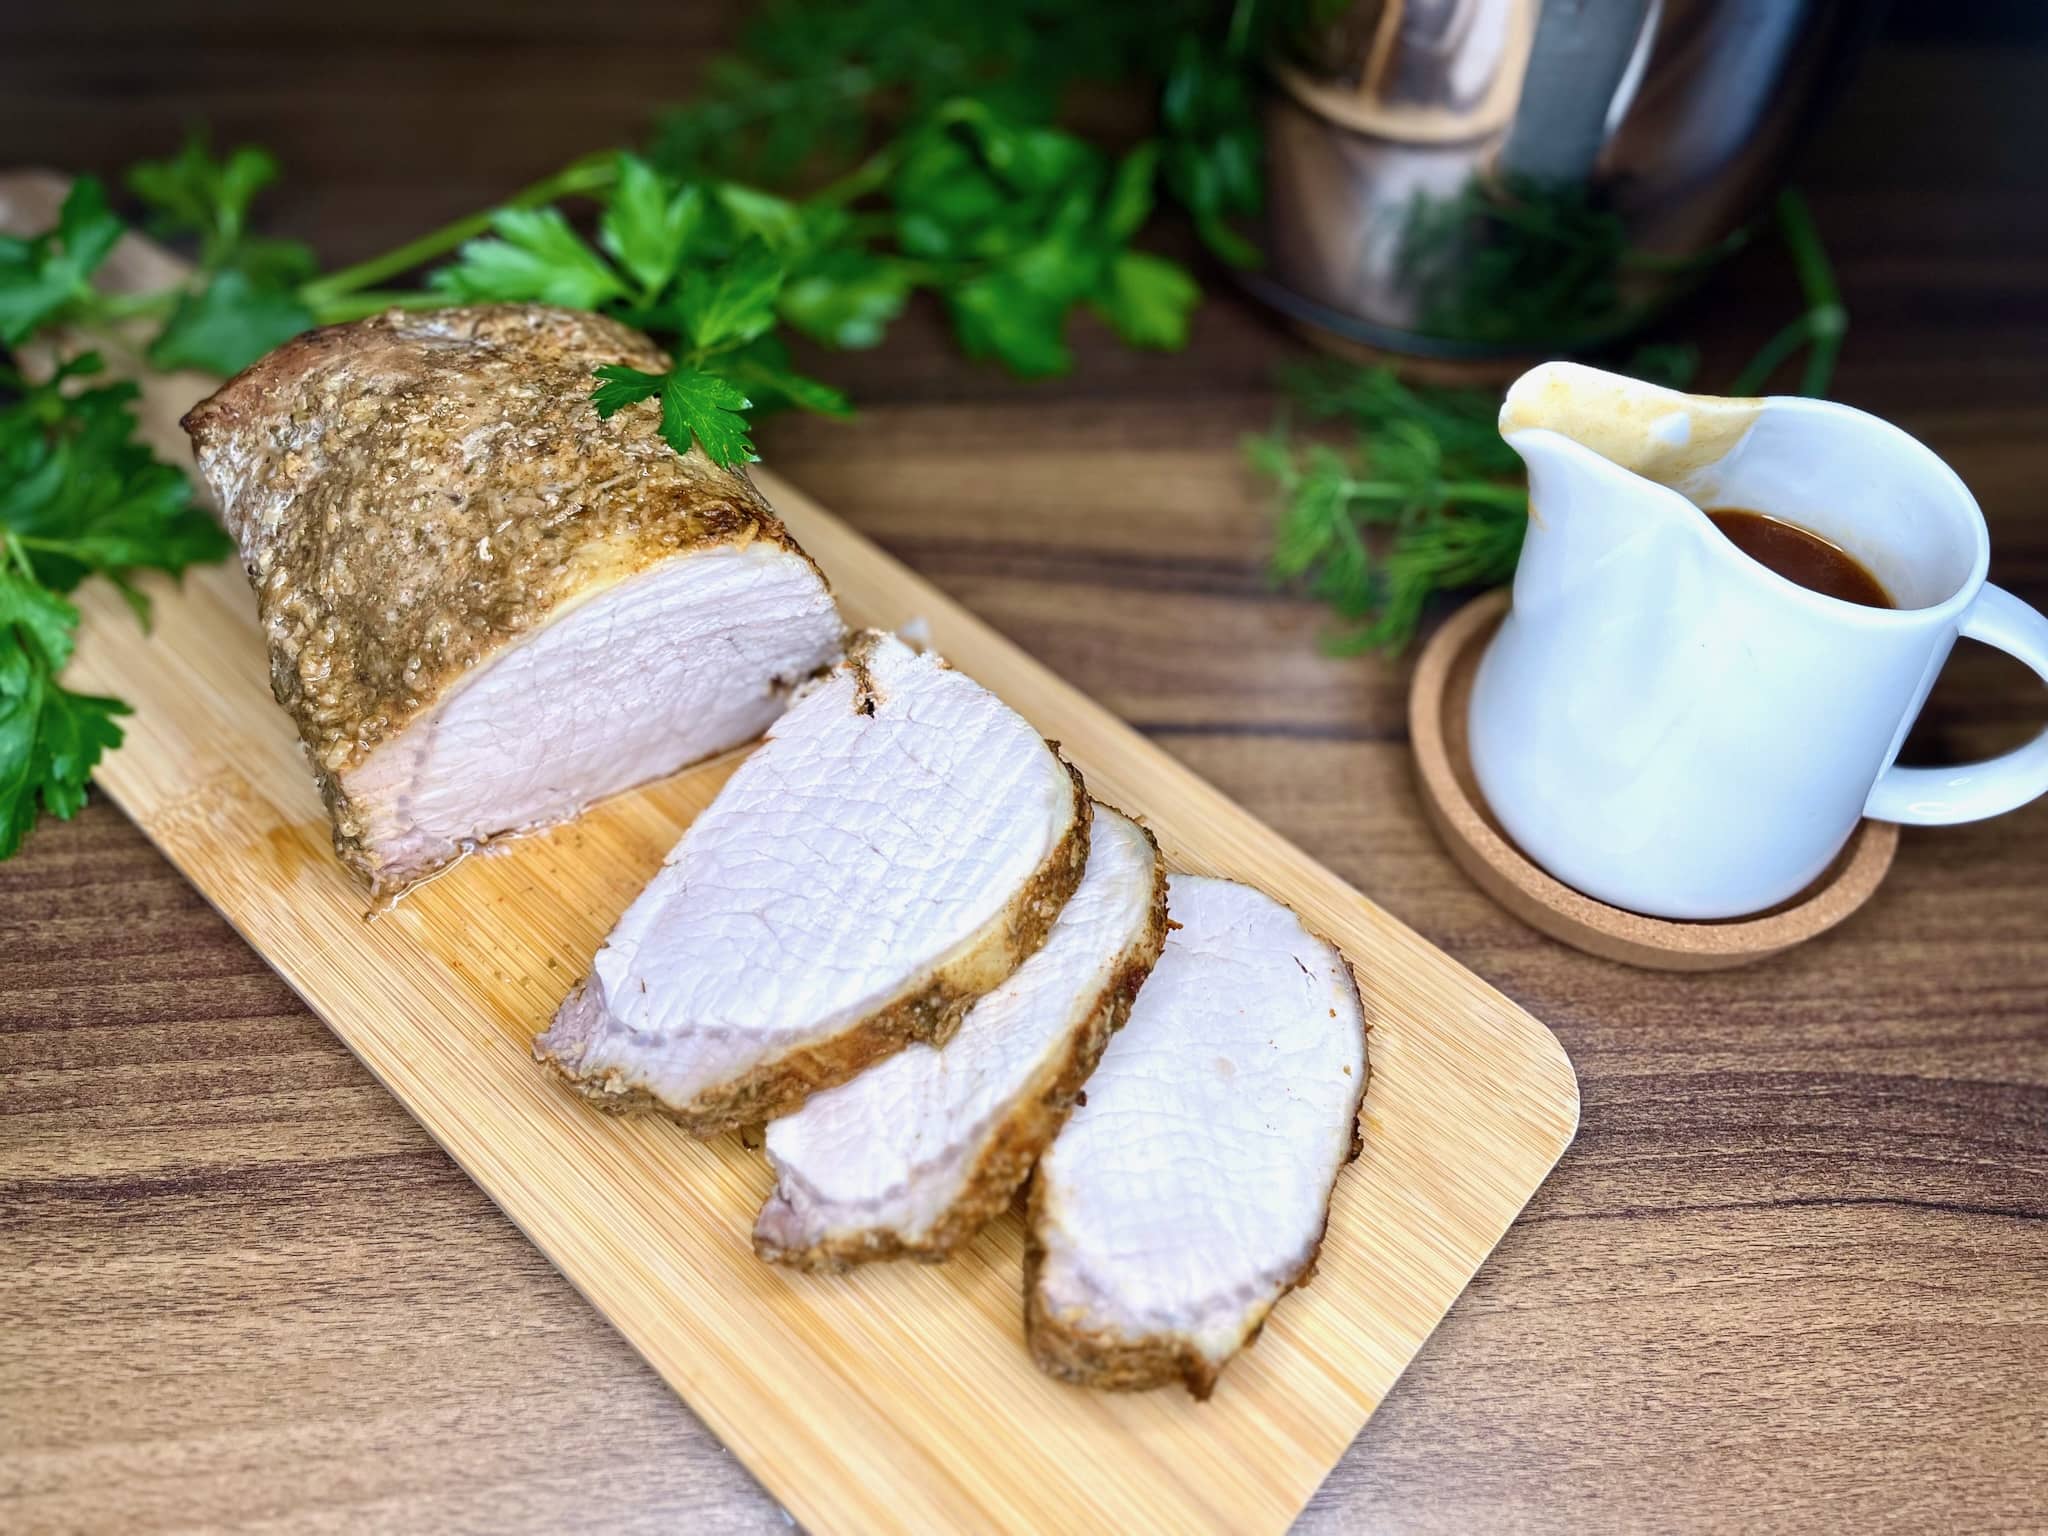 Slices of pork loin on a chopping board